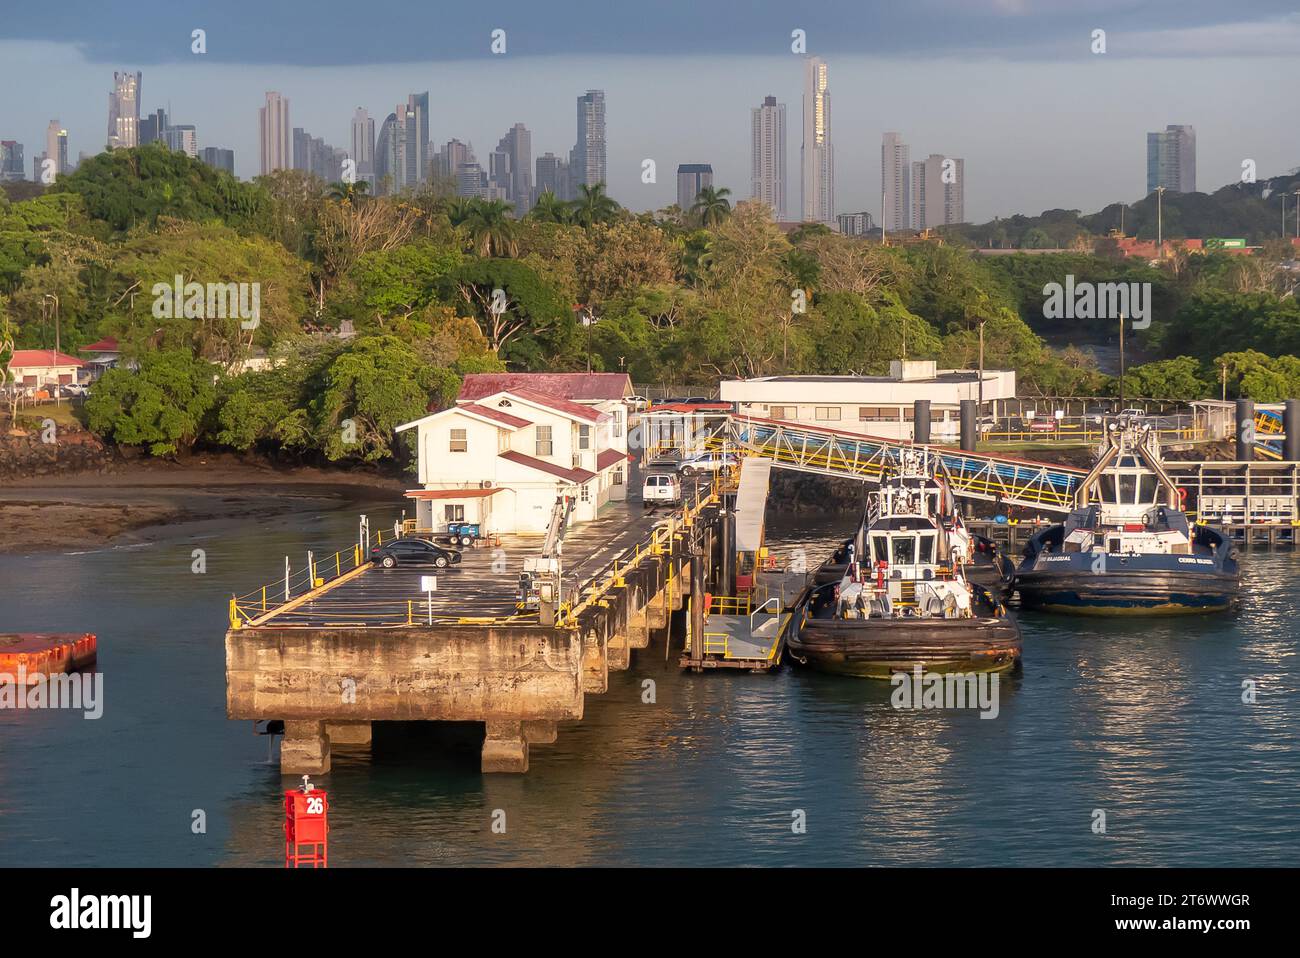 The Panama Canal: Embarcadero de Diablo, and the high-rise towers of Panama City appearing above the rainforest. Stock Photo